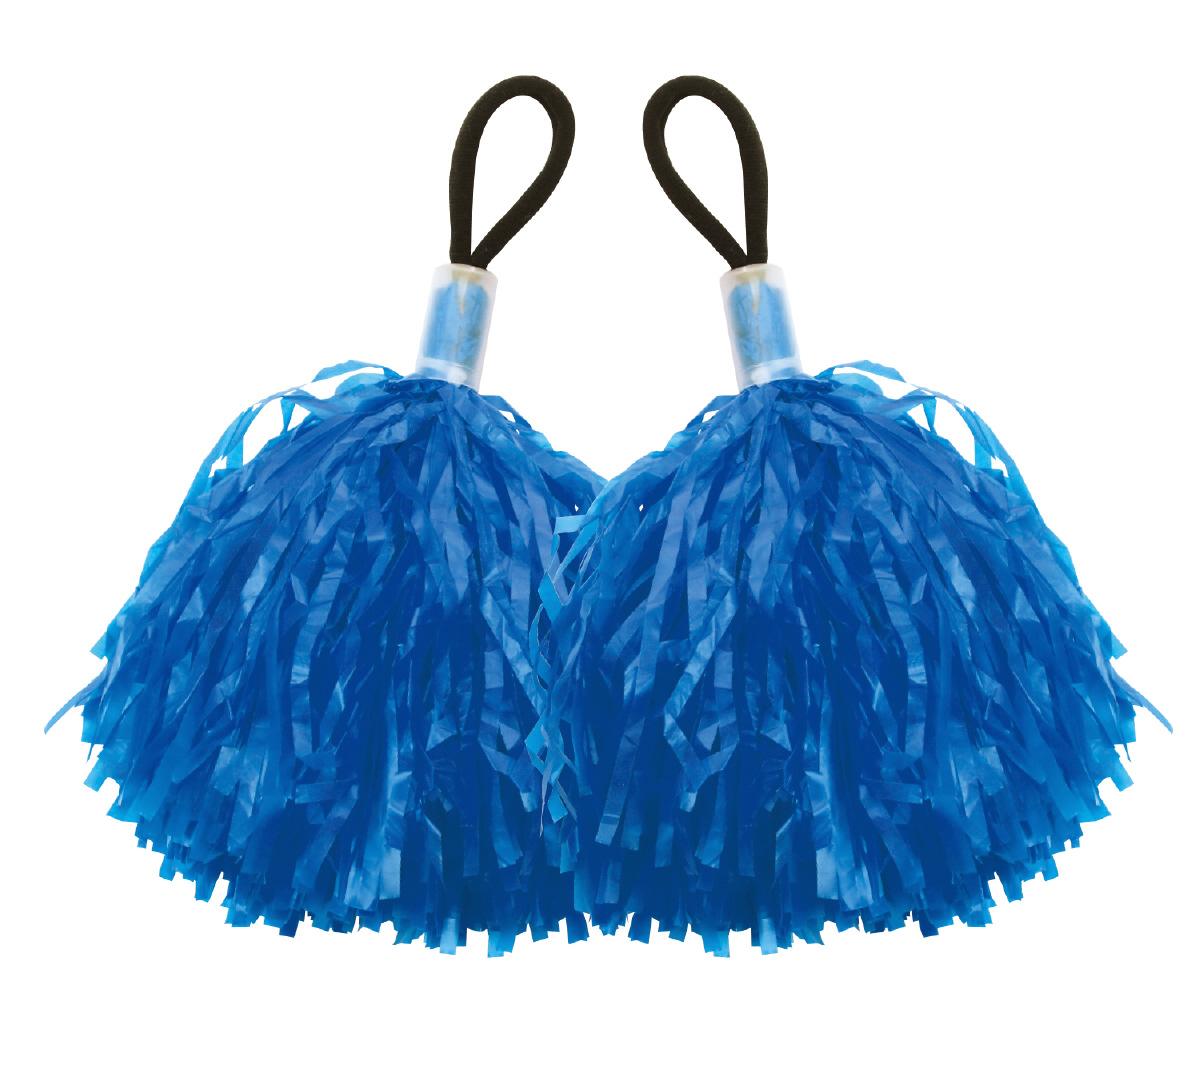  hands free pompon small 2 piece collection 6 color from selection a- Tec Dance goods motion . respondent .pon punch a physical training festival elementary school student kindergarten child care . elementary school 